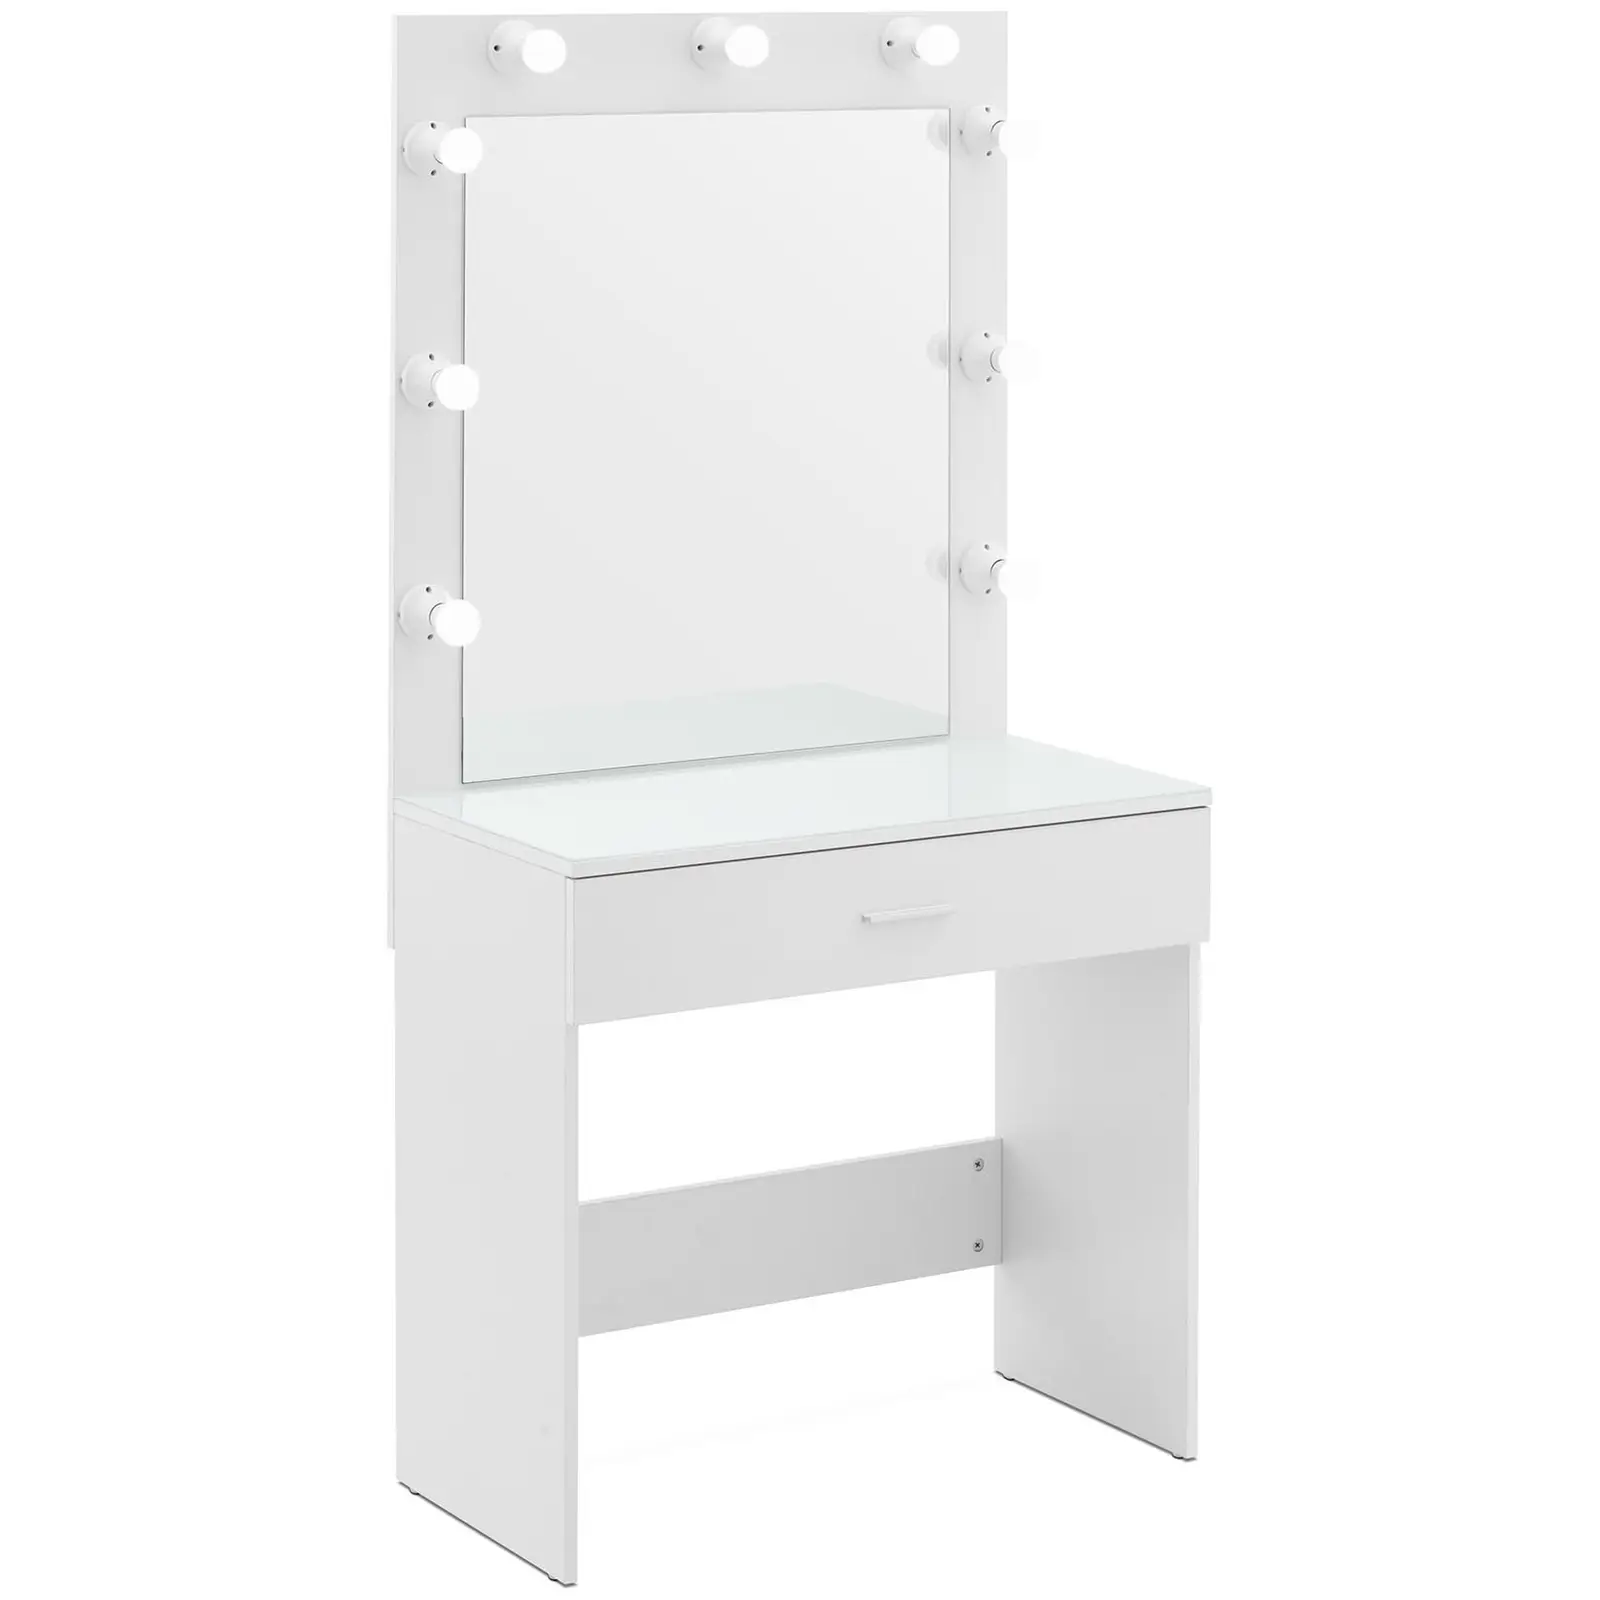 Dressing Table with mirror and light - 80 x 40 x 161 cm - white